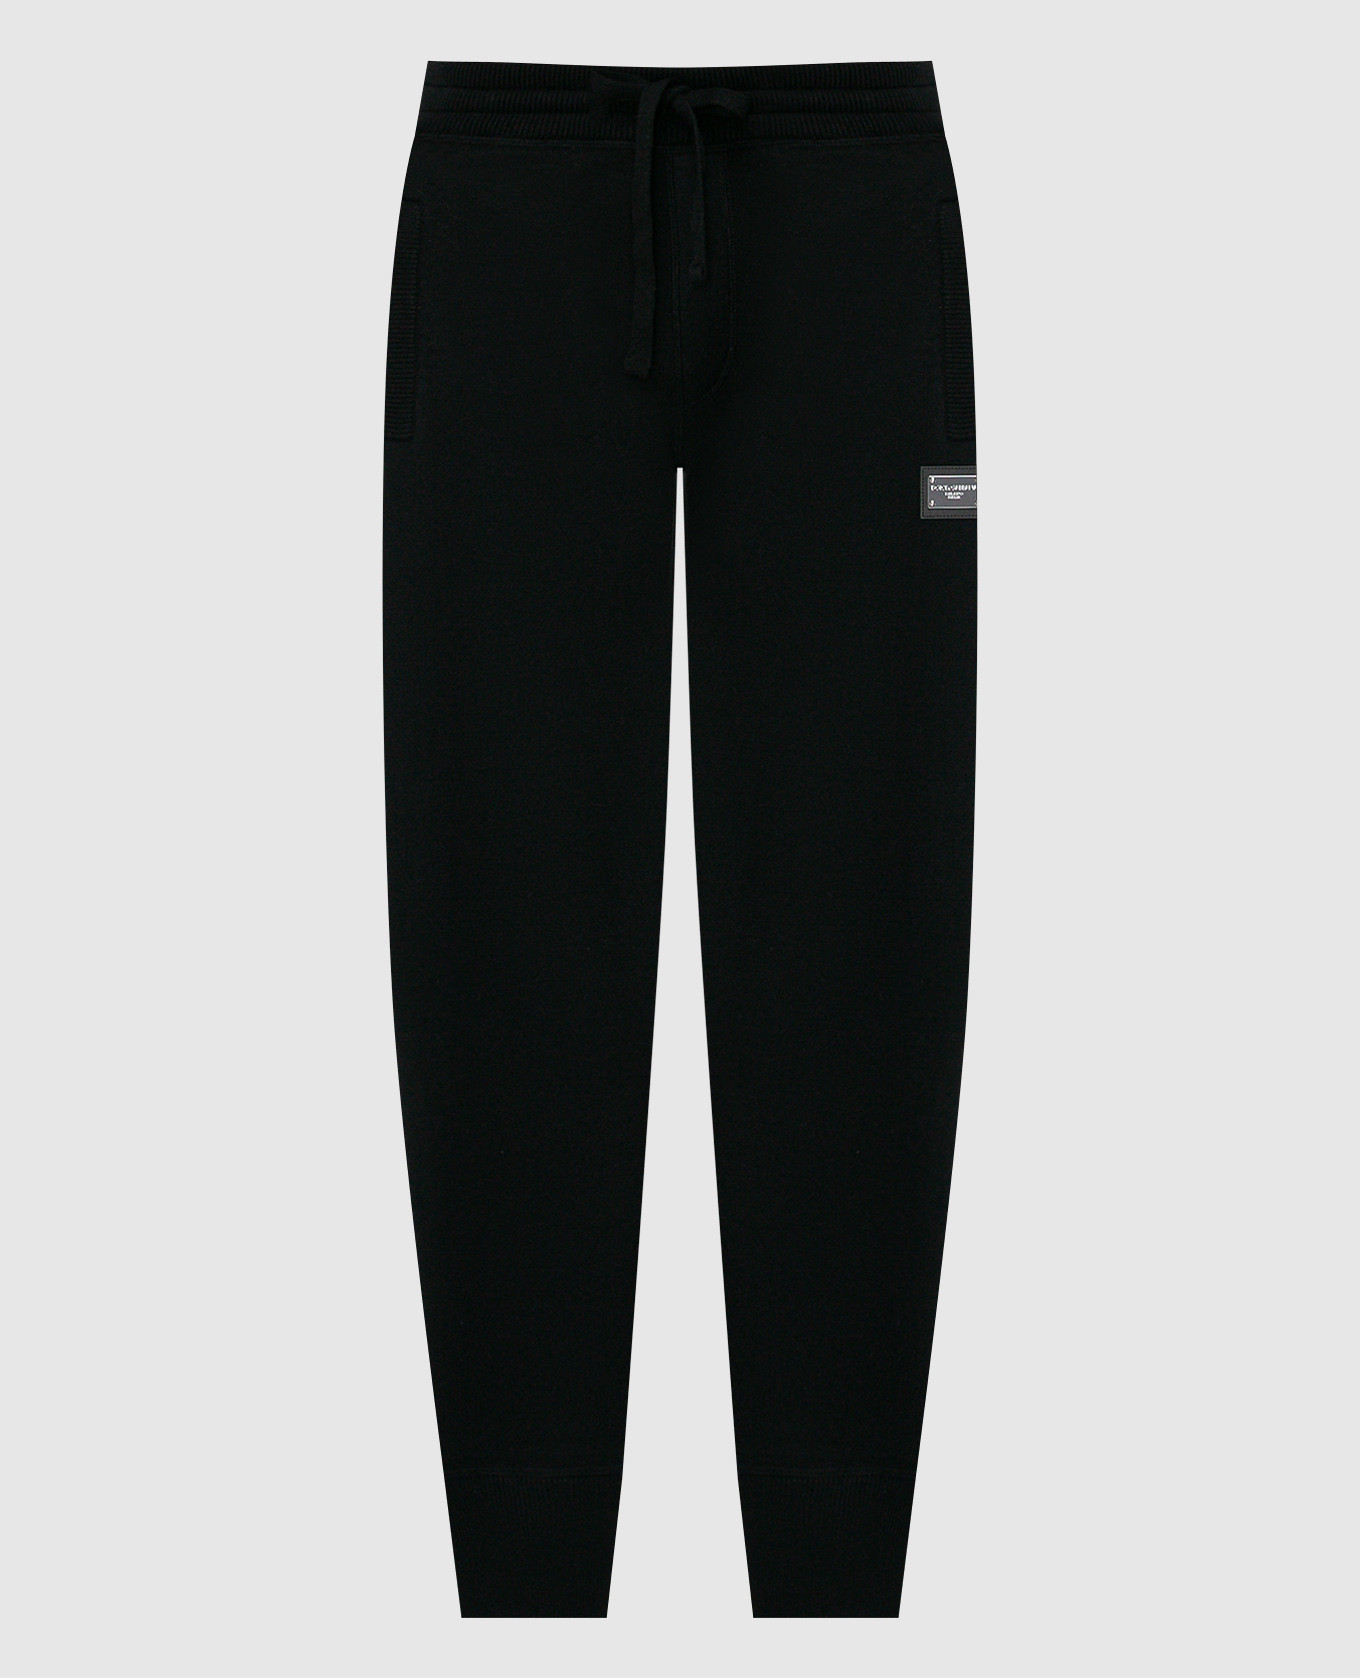 Black wool and cashmere joggers with metallic logo